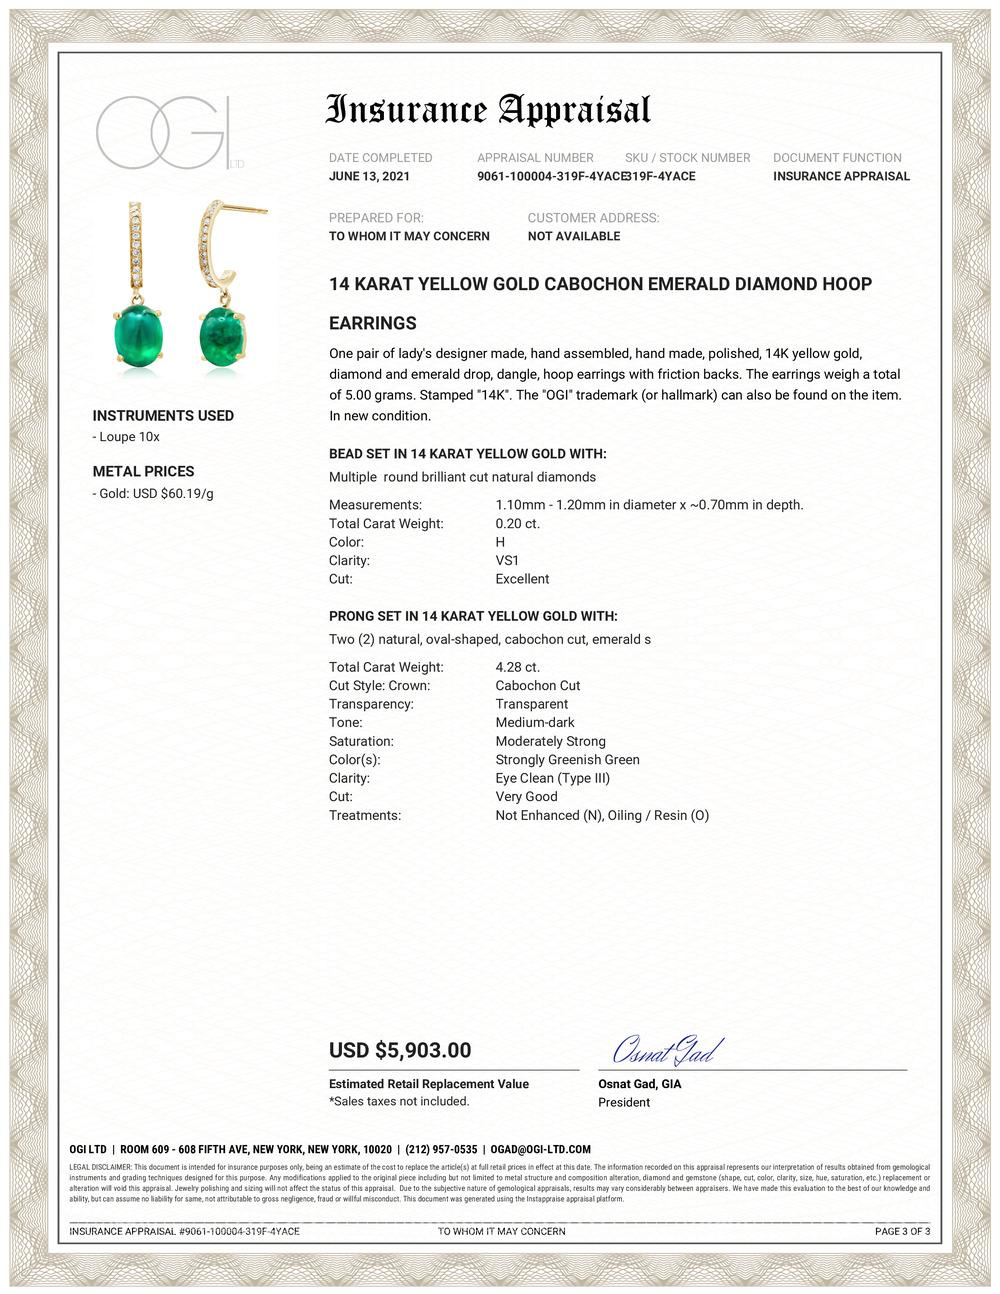 Fourteen karats yellow gold drop hoop earrings 
Two cushion-shaped cabochon emerald weighing 4.28 carat 
Diamonds weighing 0.20 carat 
Emerald hue tone color is of grass green
One of a kind earrings 
New Earrings 
Handmade in the USA
Earrings hoops